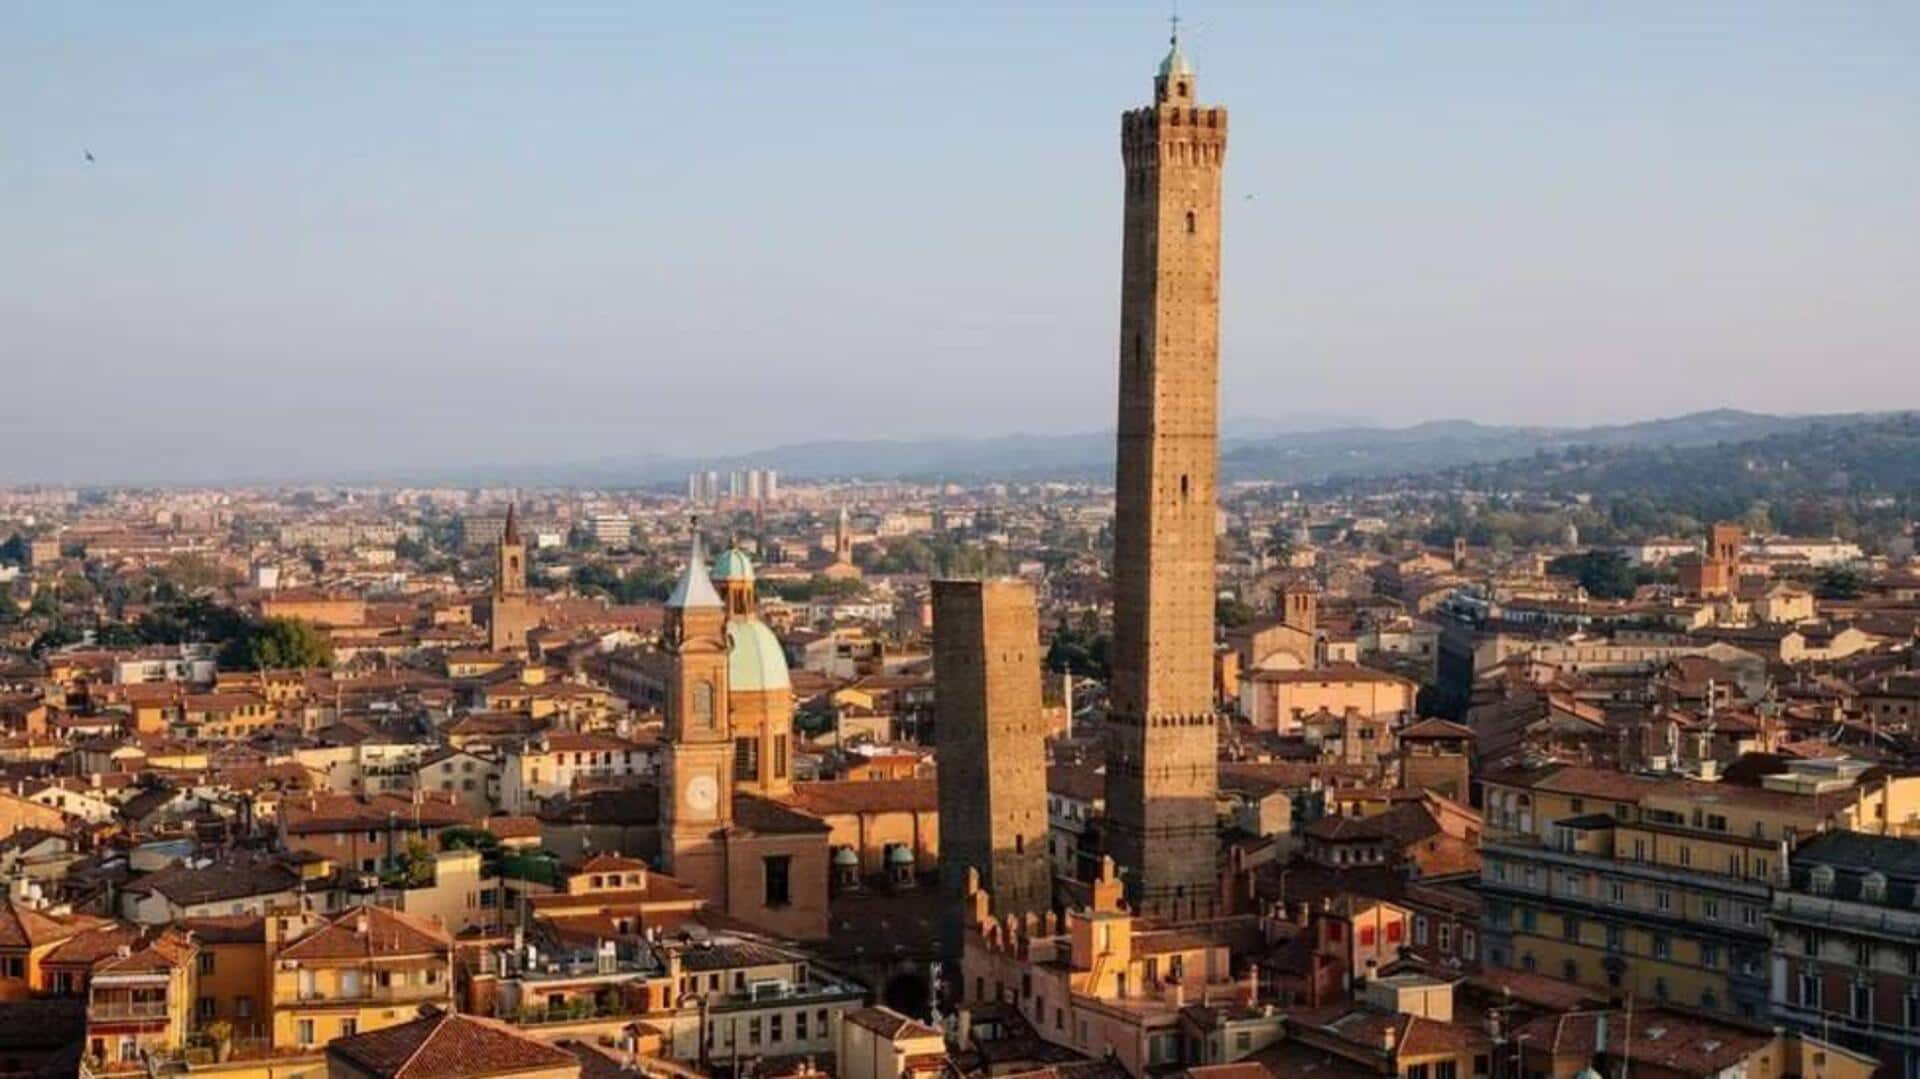 Italian city on high alert over 'leaning tower' collapse fear